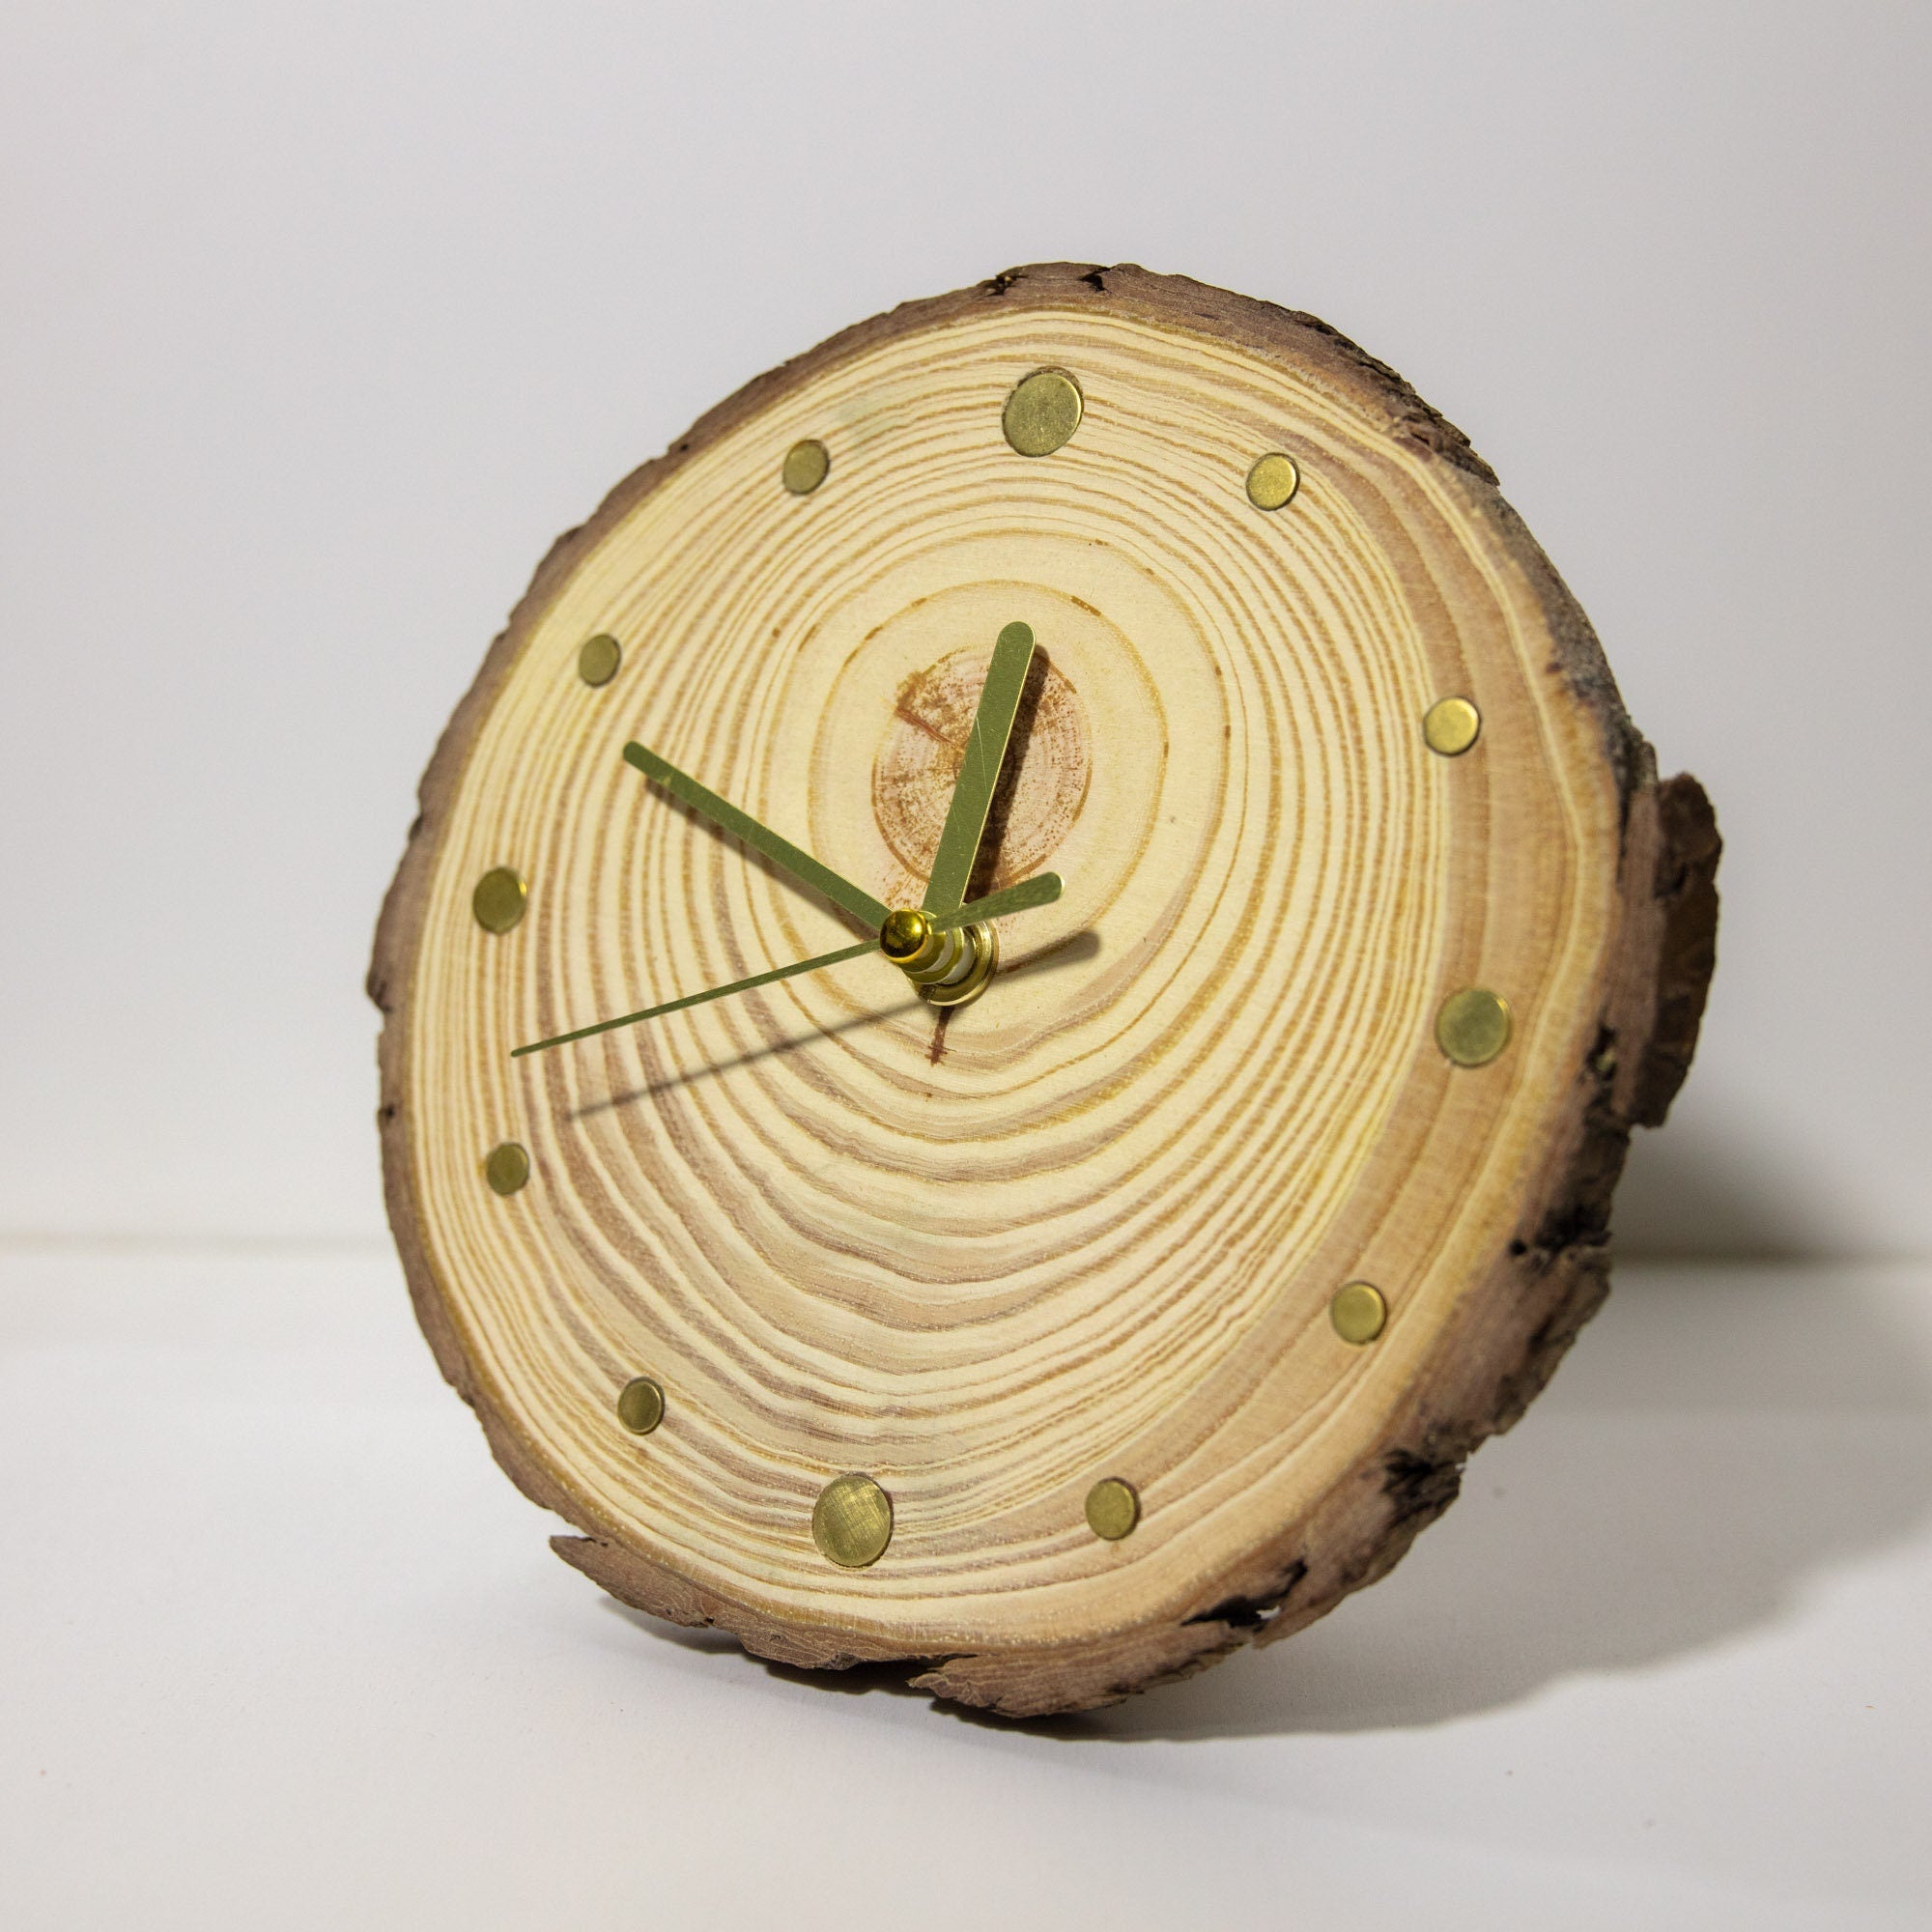 Artisan-Crafted Pine Wood Table Clock: Unique Masterpiece with Gold Metal Markers - Elegant Design, Silent Mechanism - Perfect Gift-ArtWorkCrafts.com